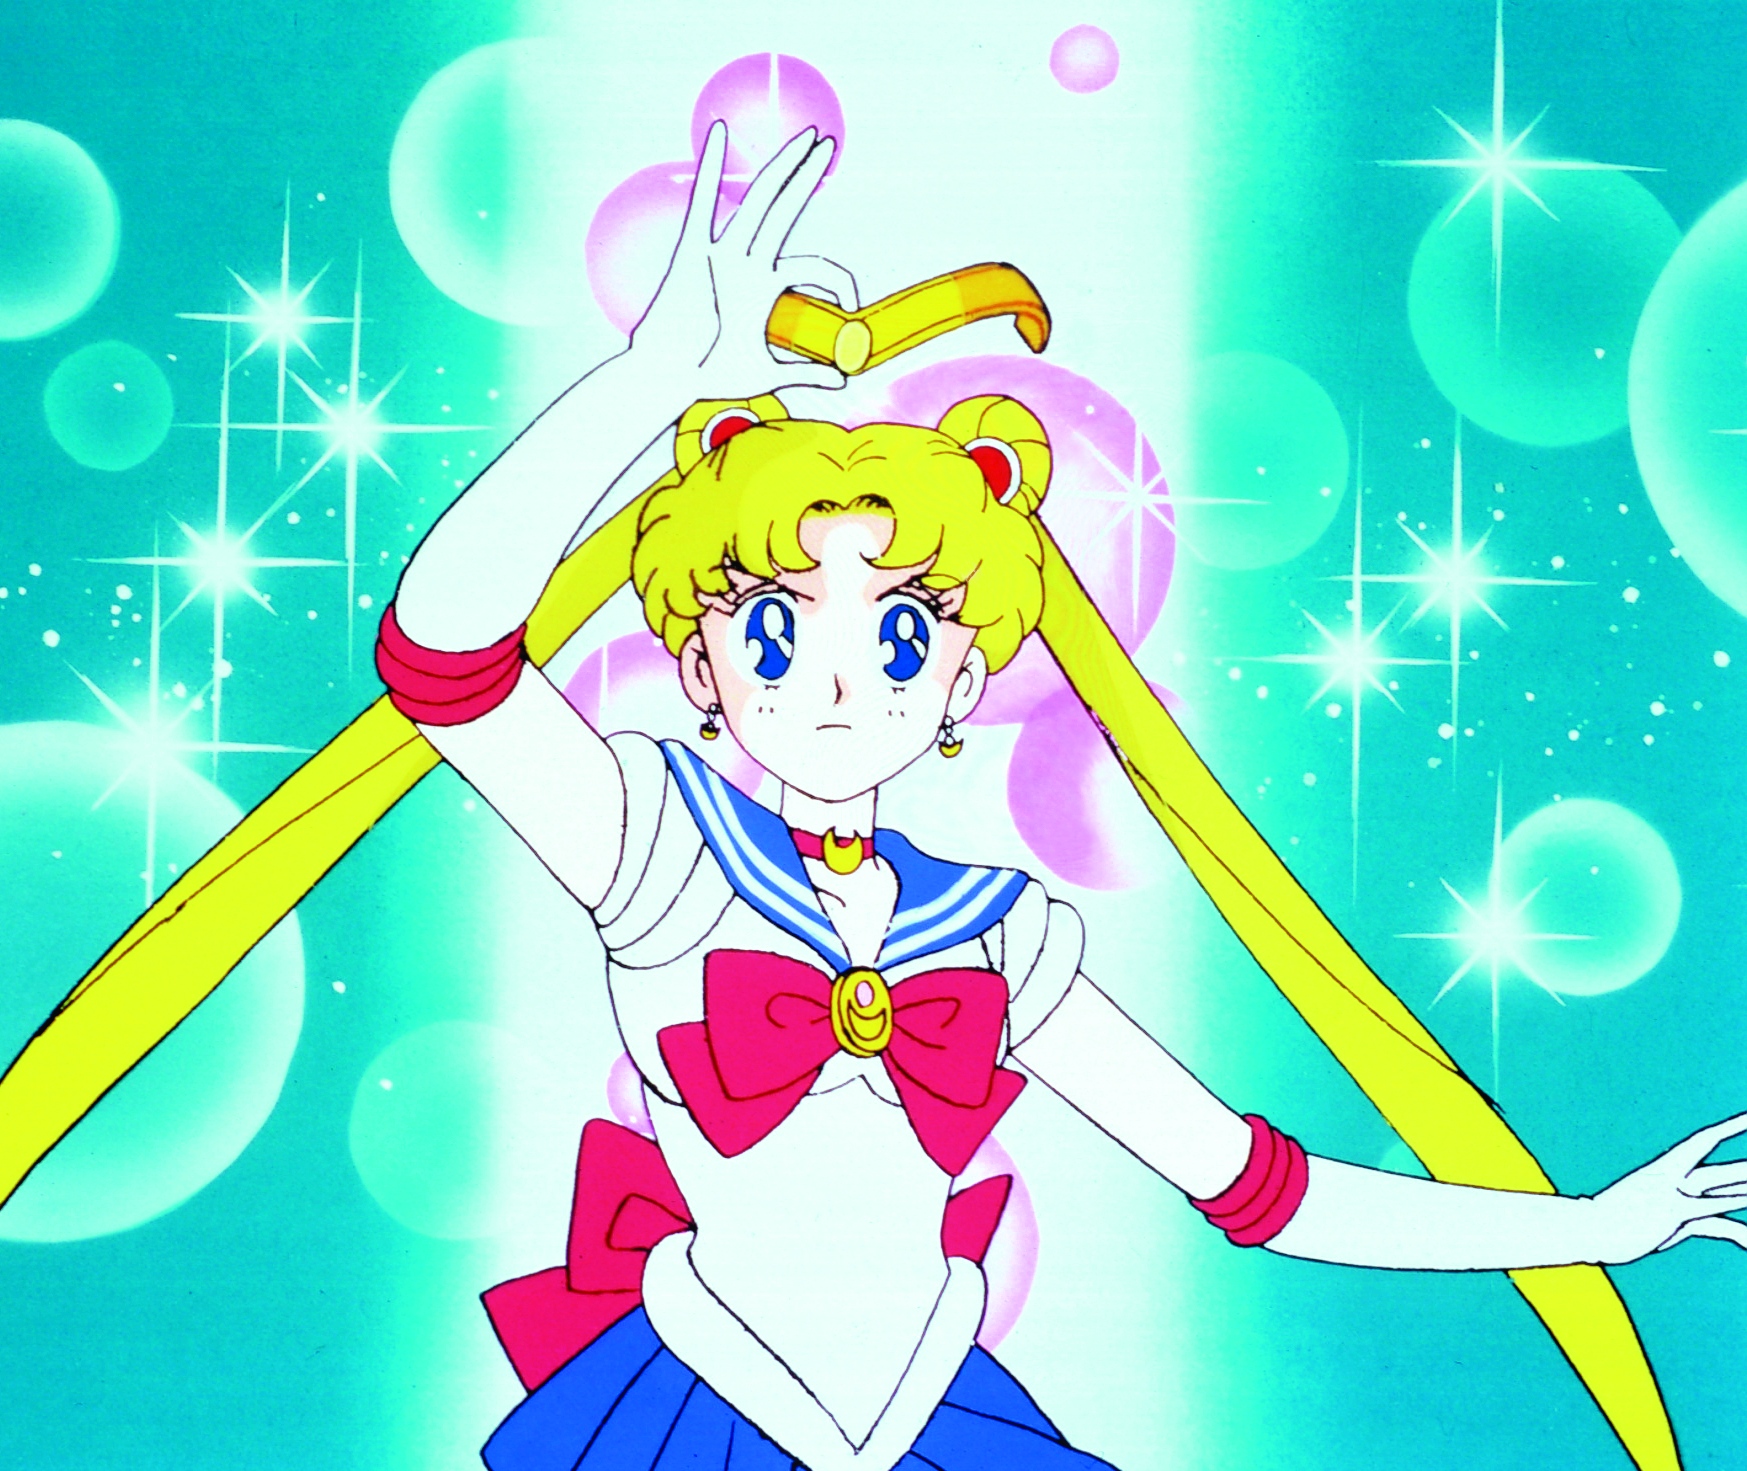 Still from the animated series Sailor Moon (Japan 1992-1997)